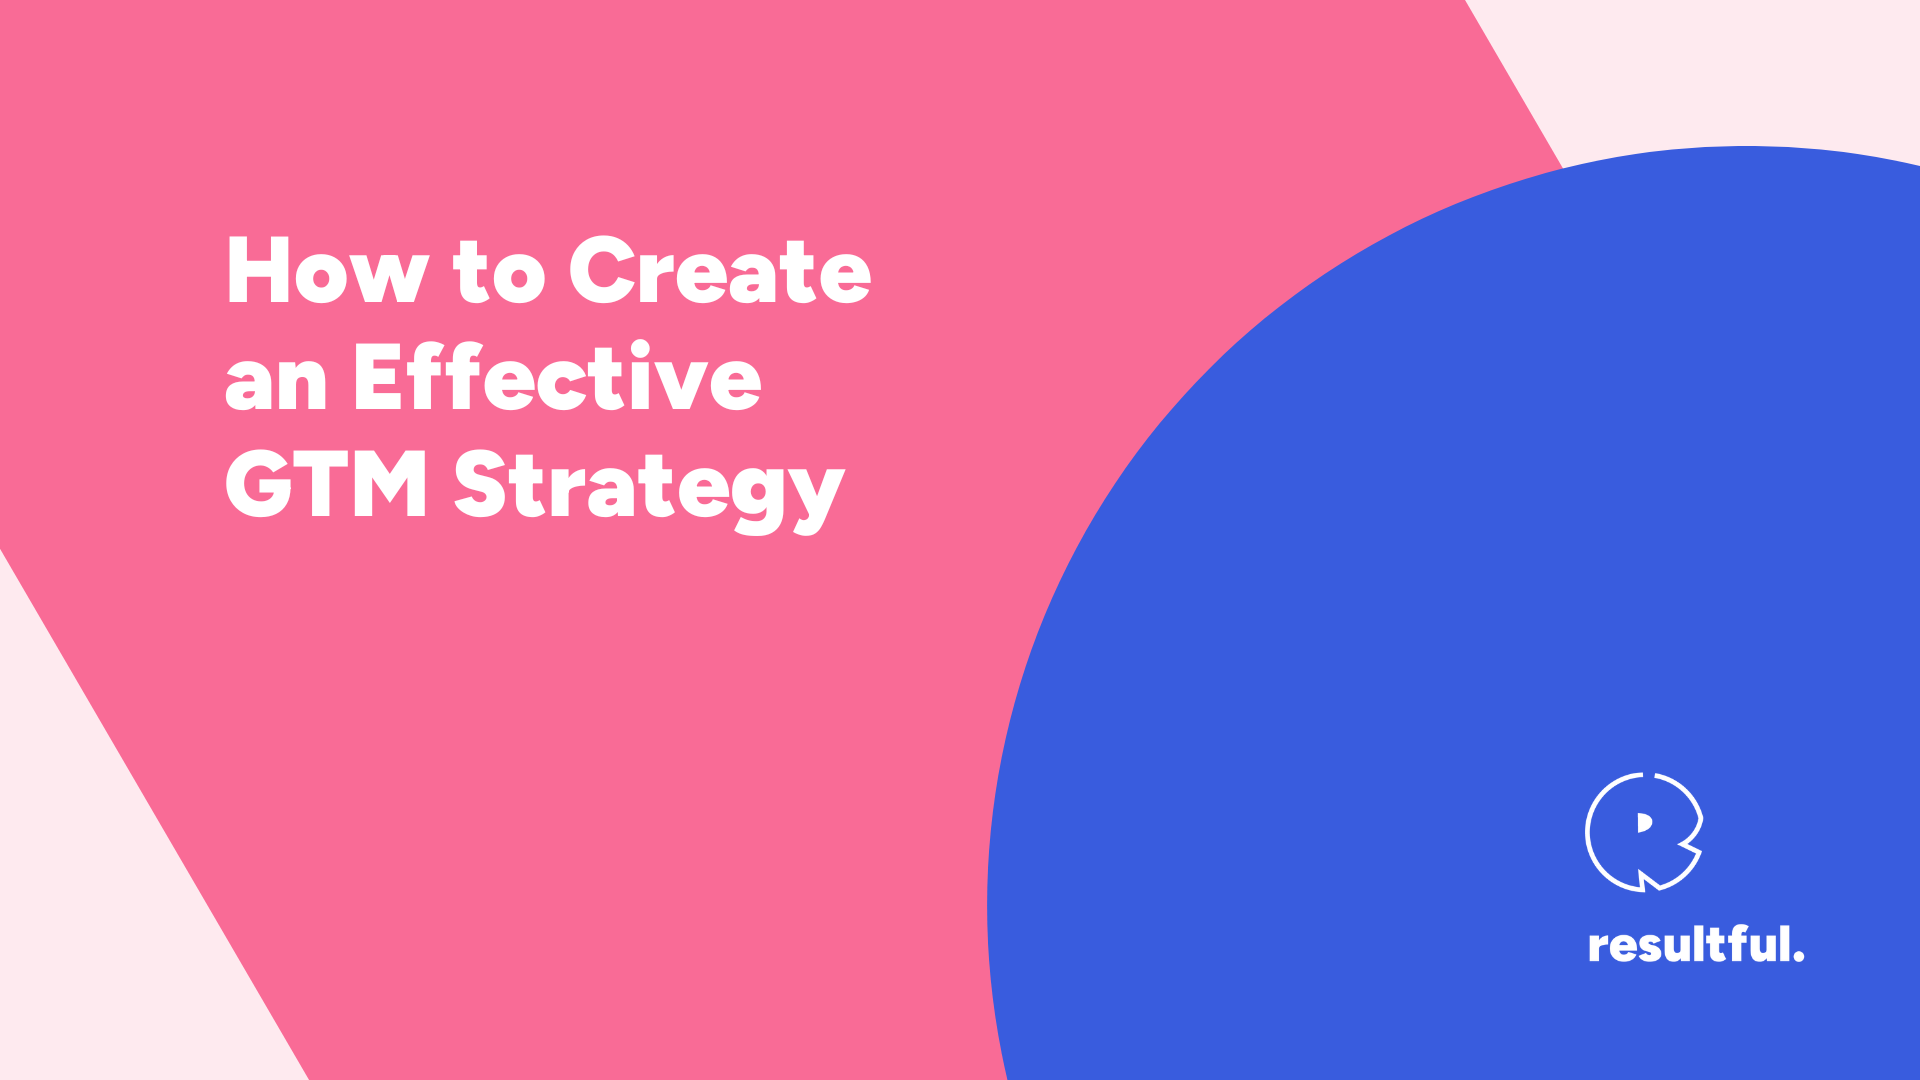 How to Create an Effective GTM Strategy